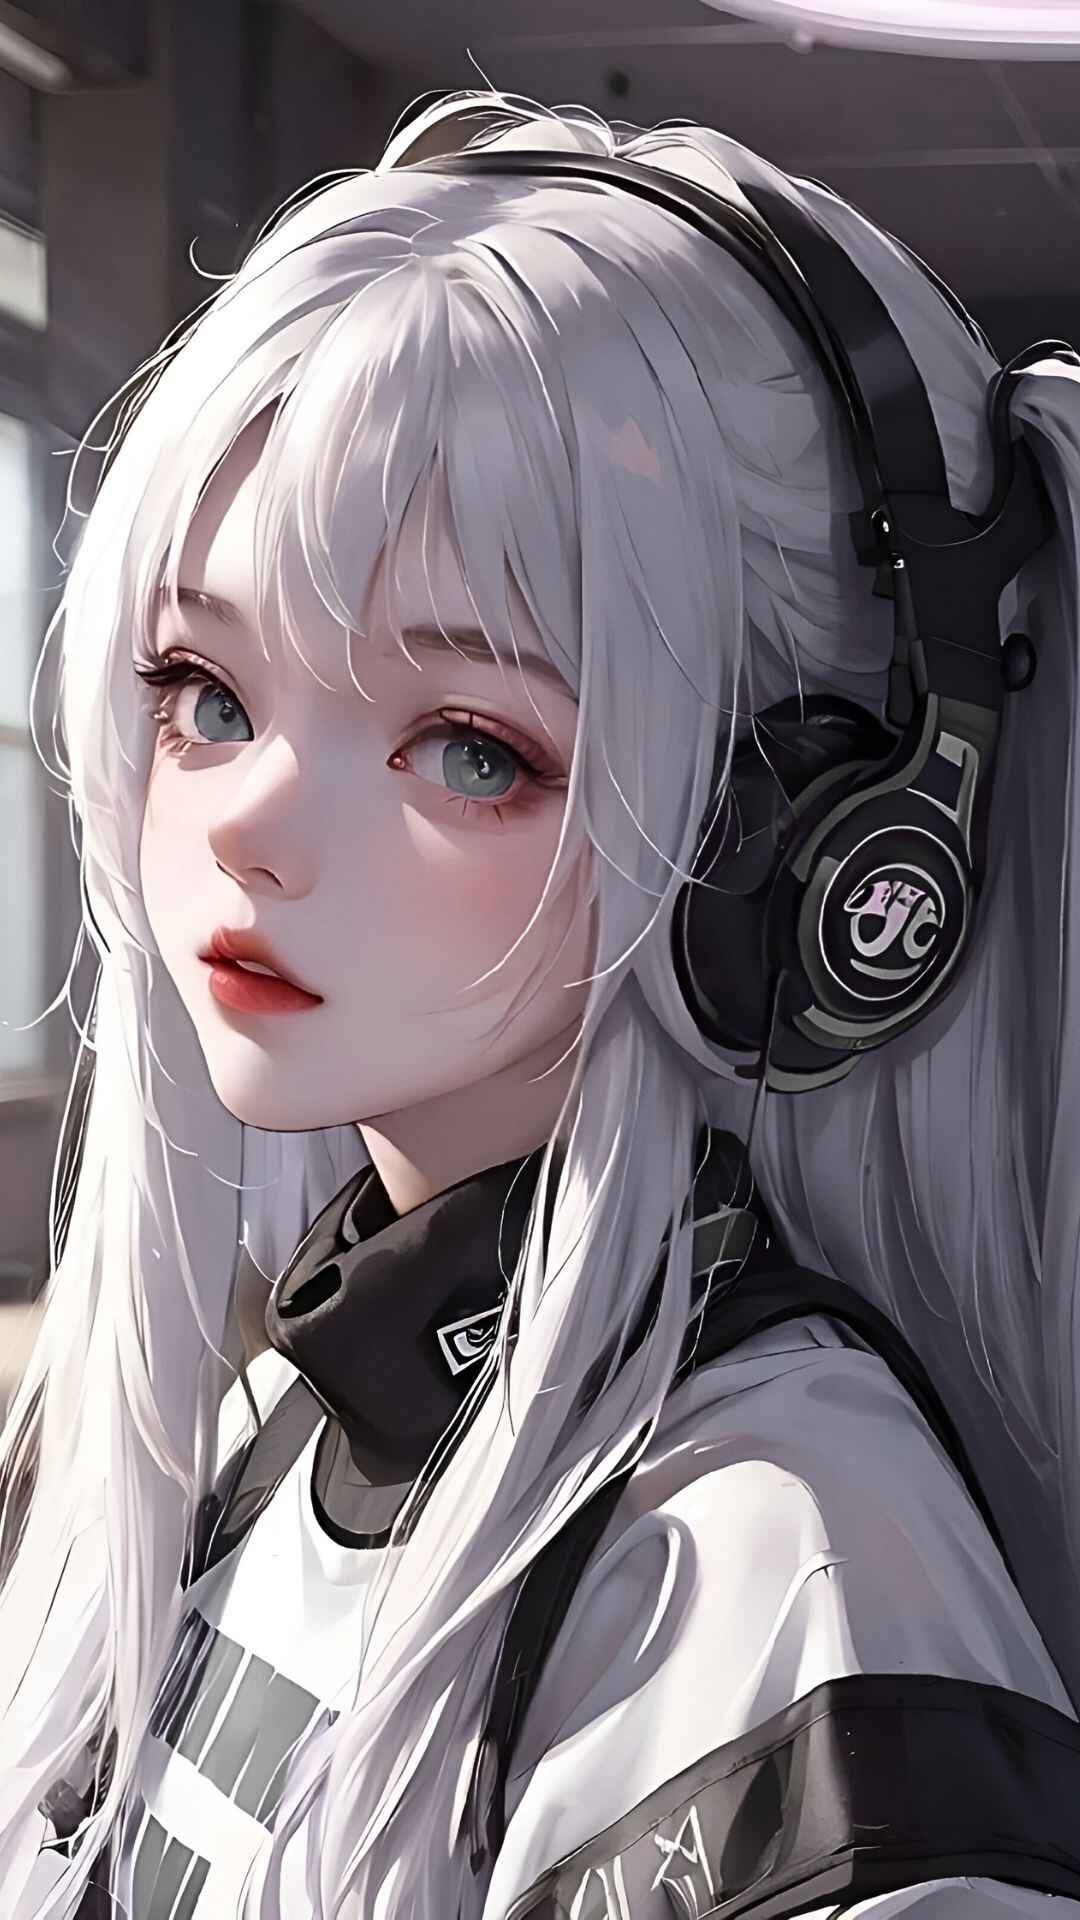 Lonely Anime Girl With Headphones Wallpaper